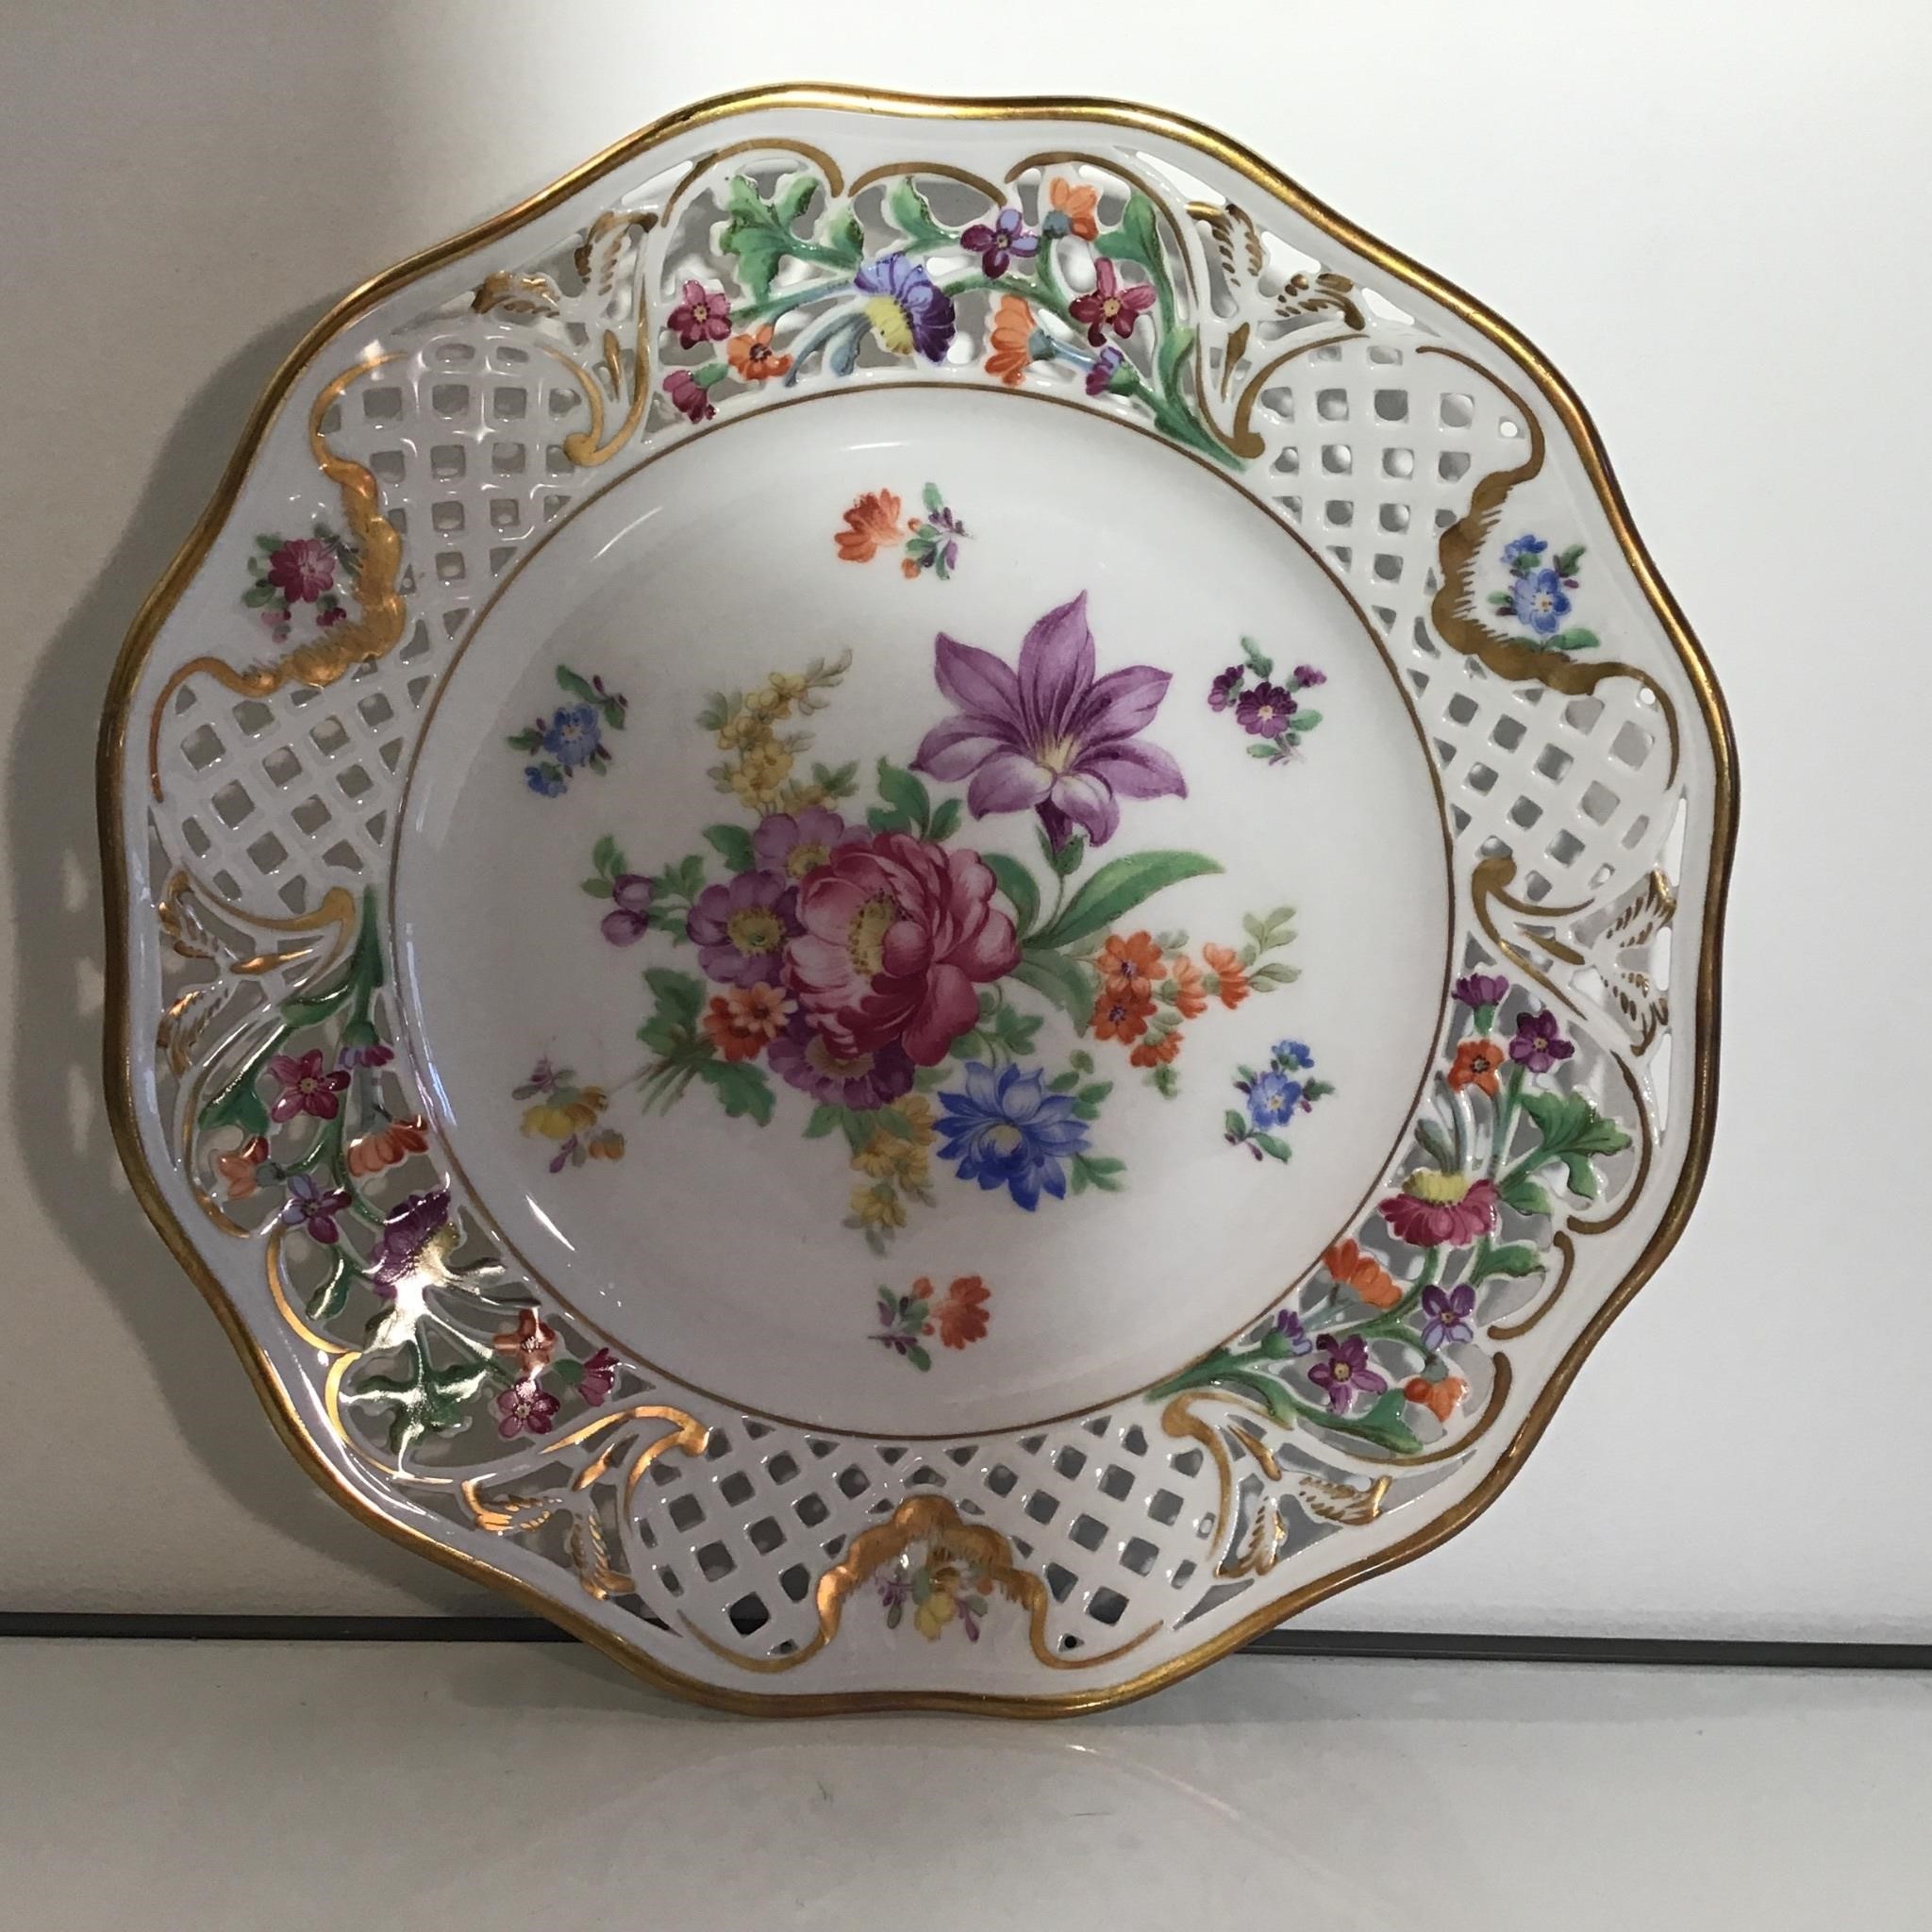 DRESDEN FLORAL PLATE GERMANY